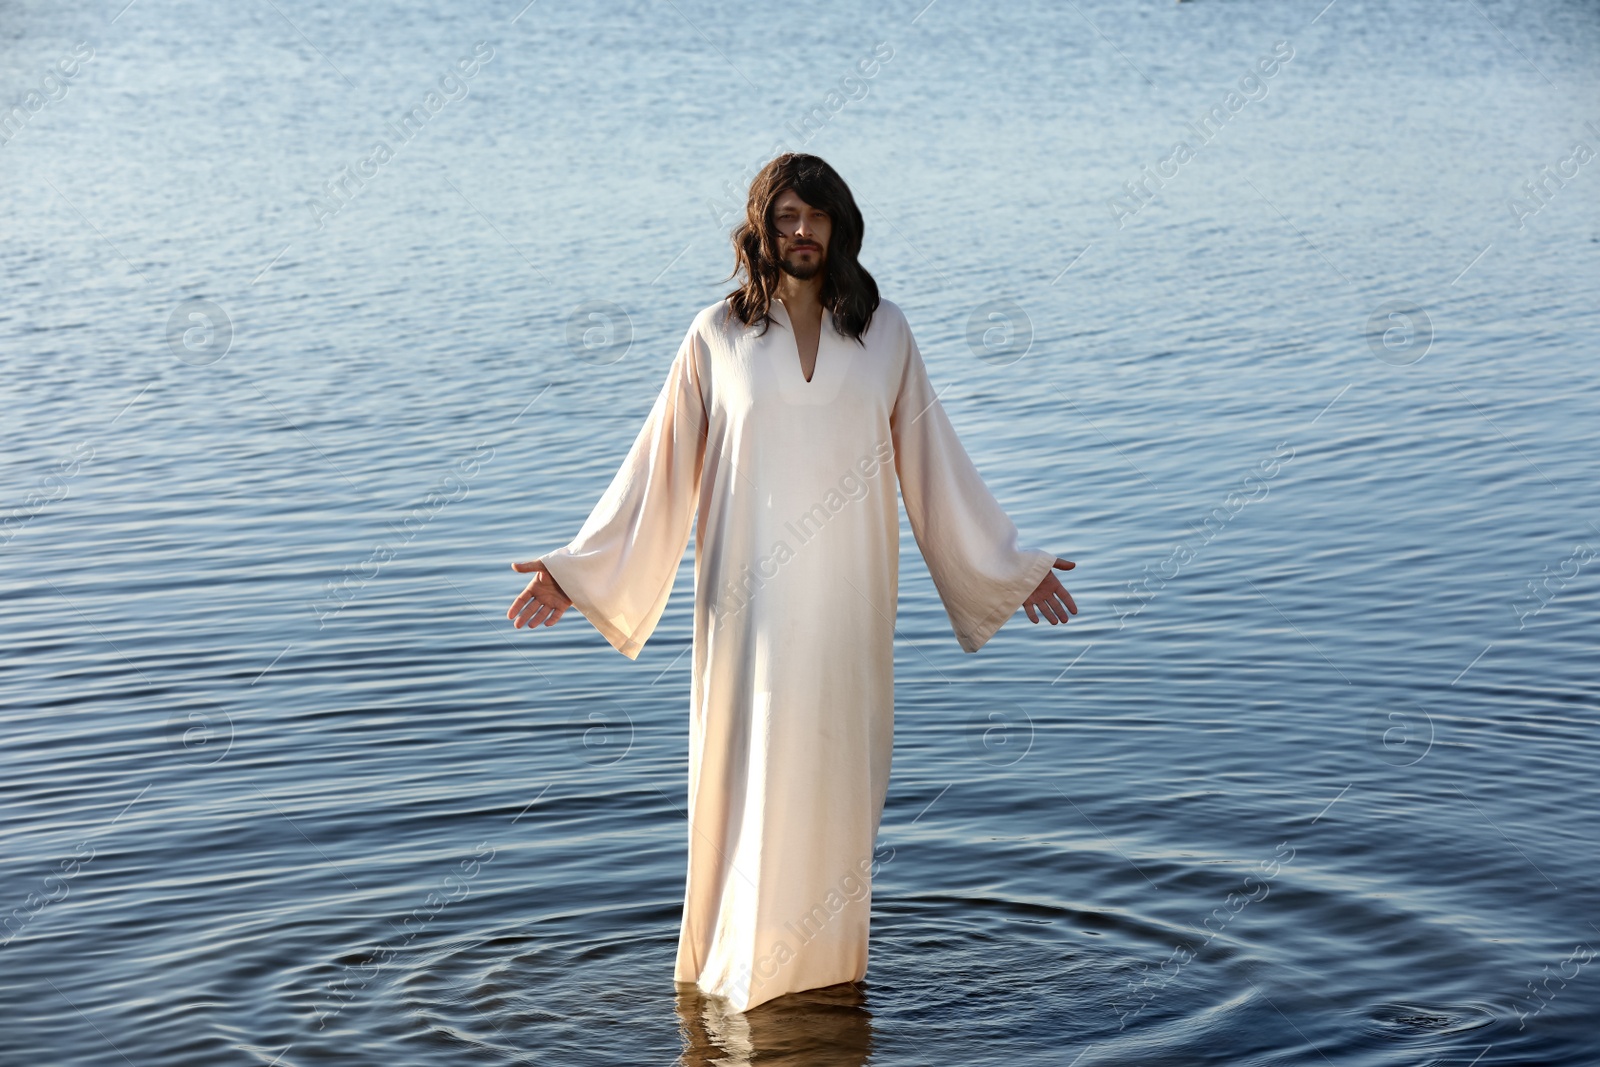 Photo of Jesus Christ in water lit by morning sun